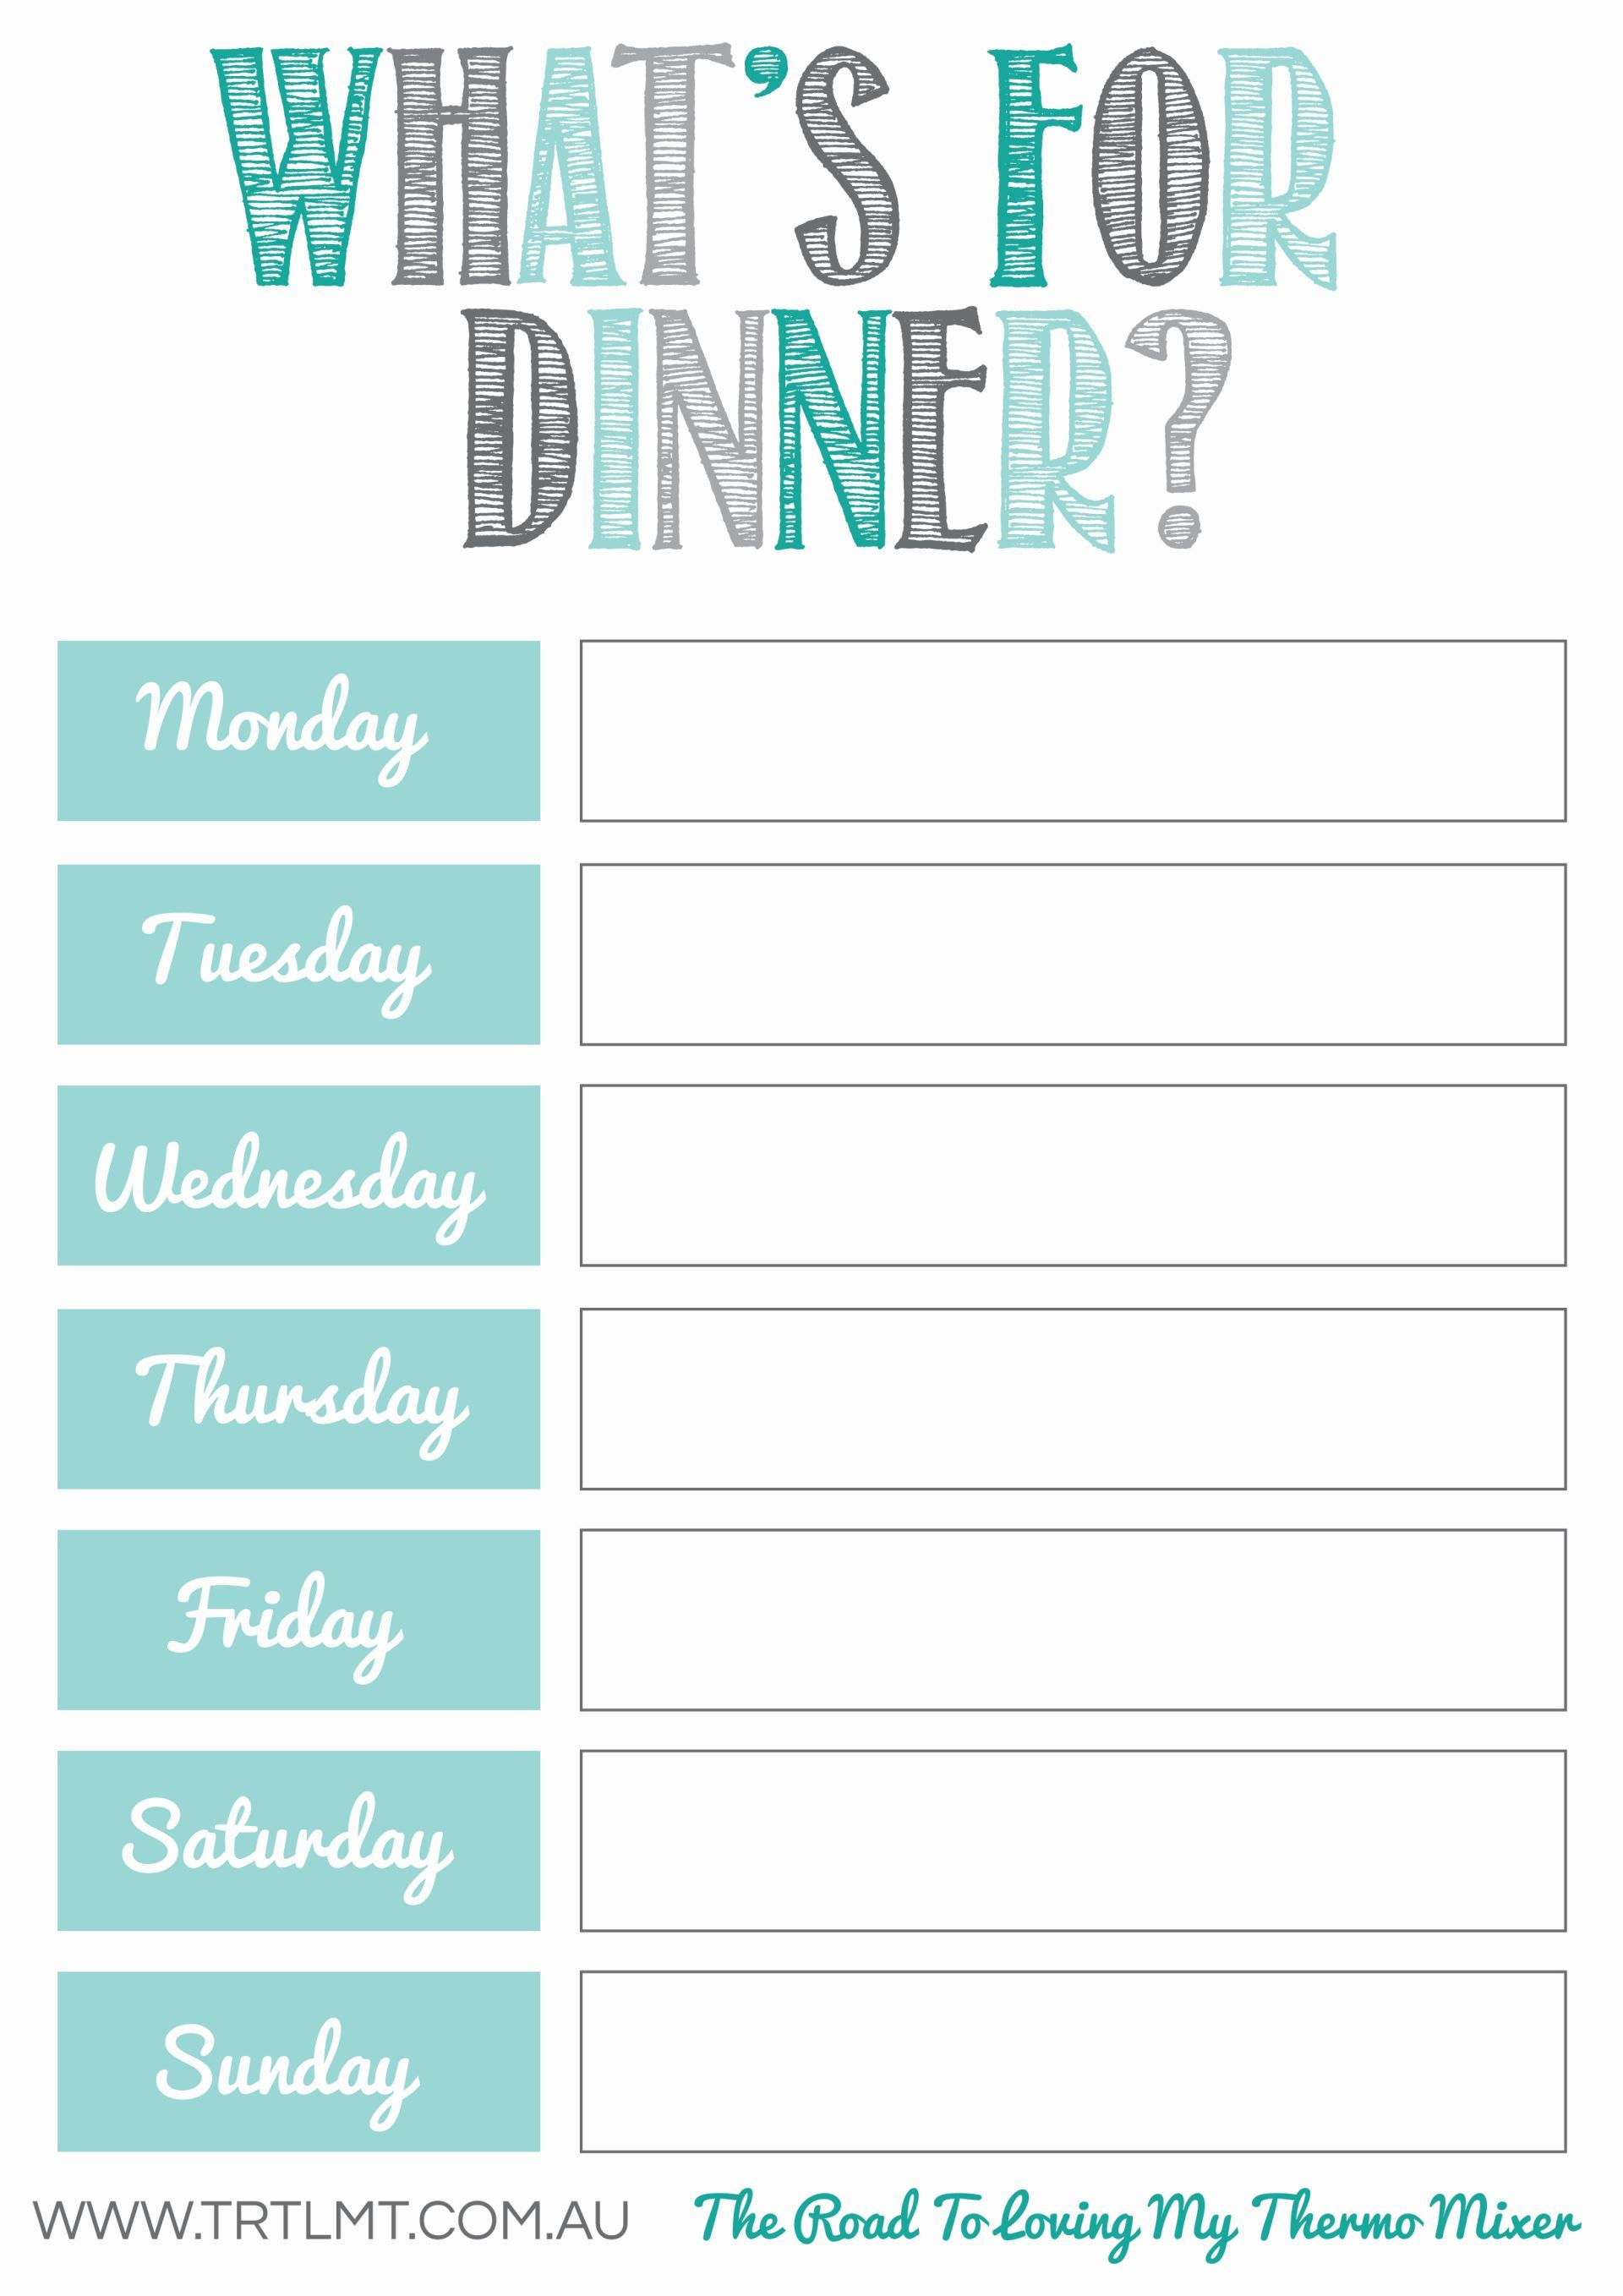 Free Meal Planning Printables | Food And Recipes | Pinterest - Free Printable Weekly Meal Planner